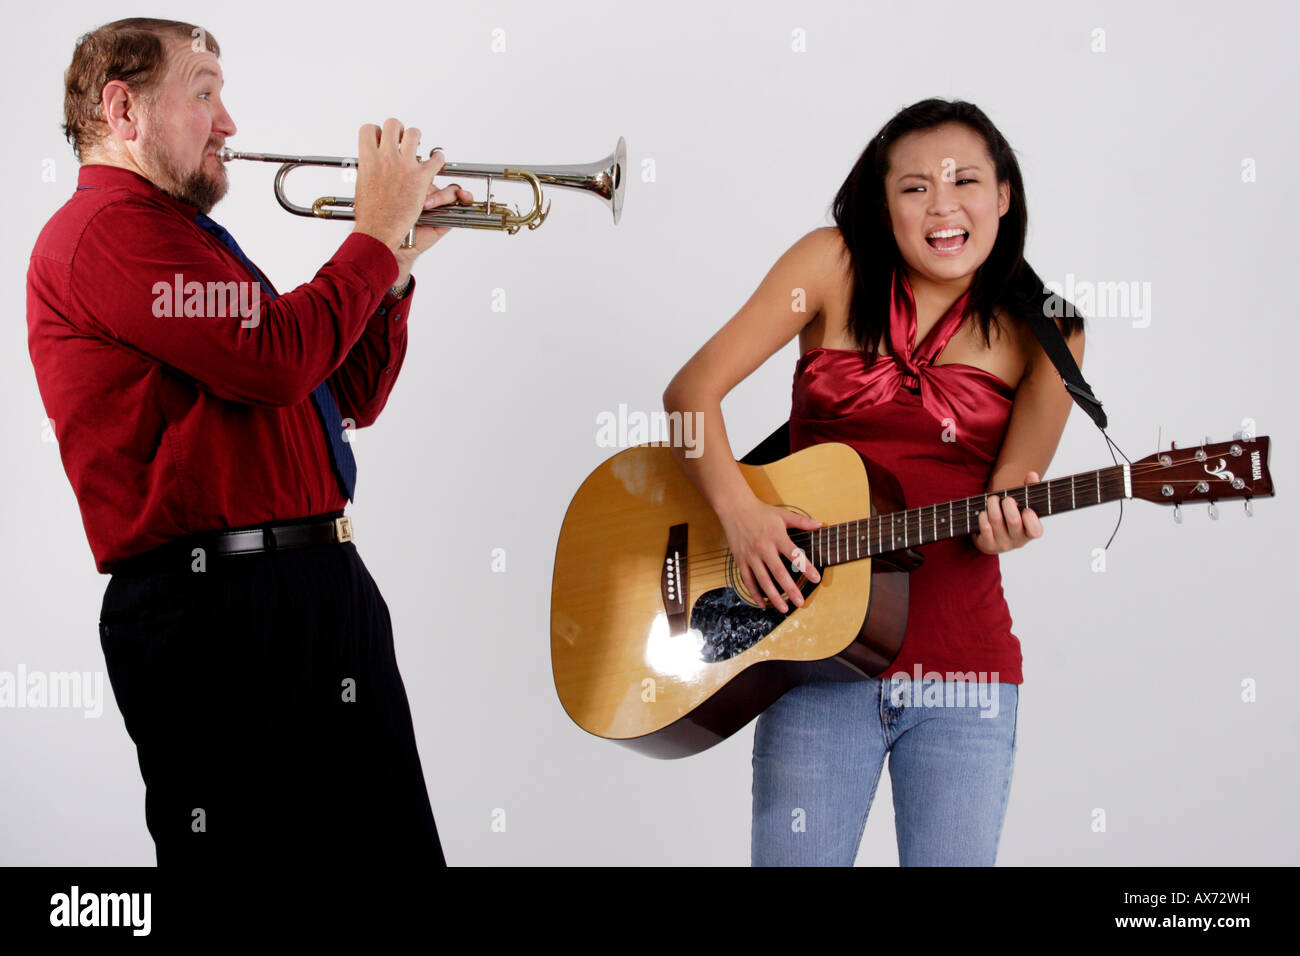 Stock Photograph of a man playing a trumpet into the ear of a teen girl with a guitar Stock Photo